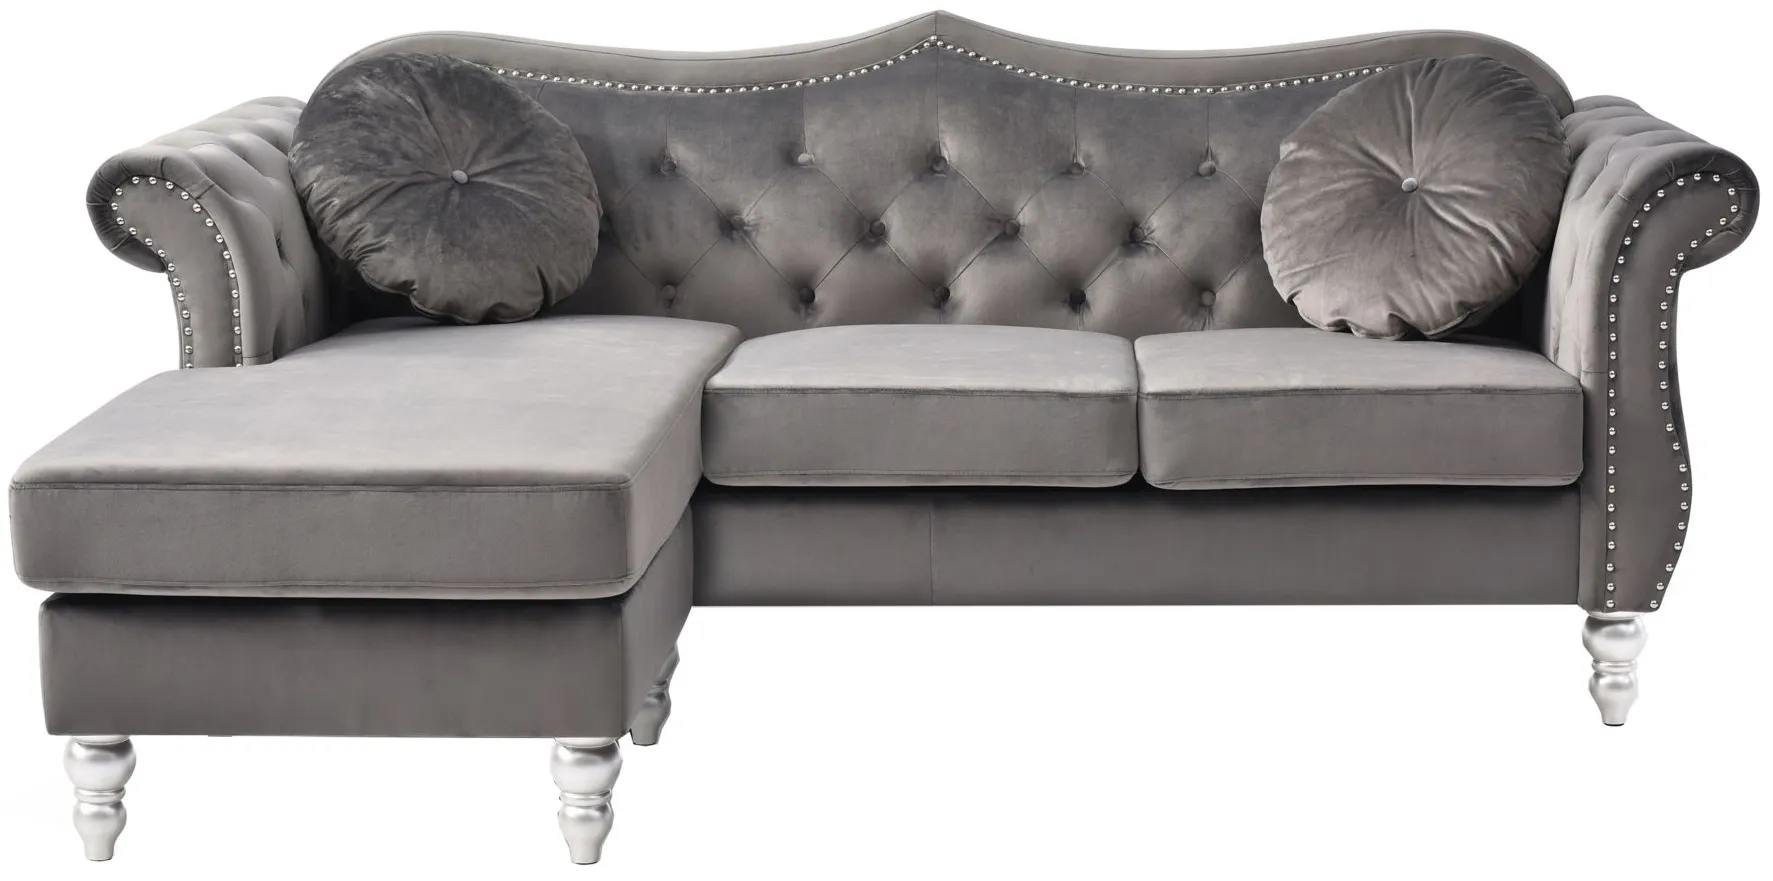 Hollywood Sectional Sofa in Dark Gray by Glory Furniture